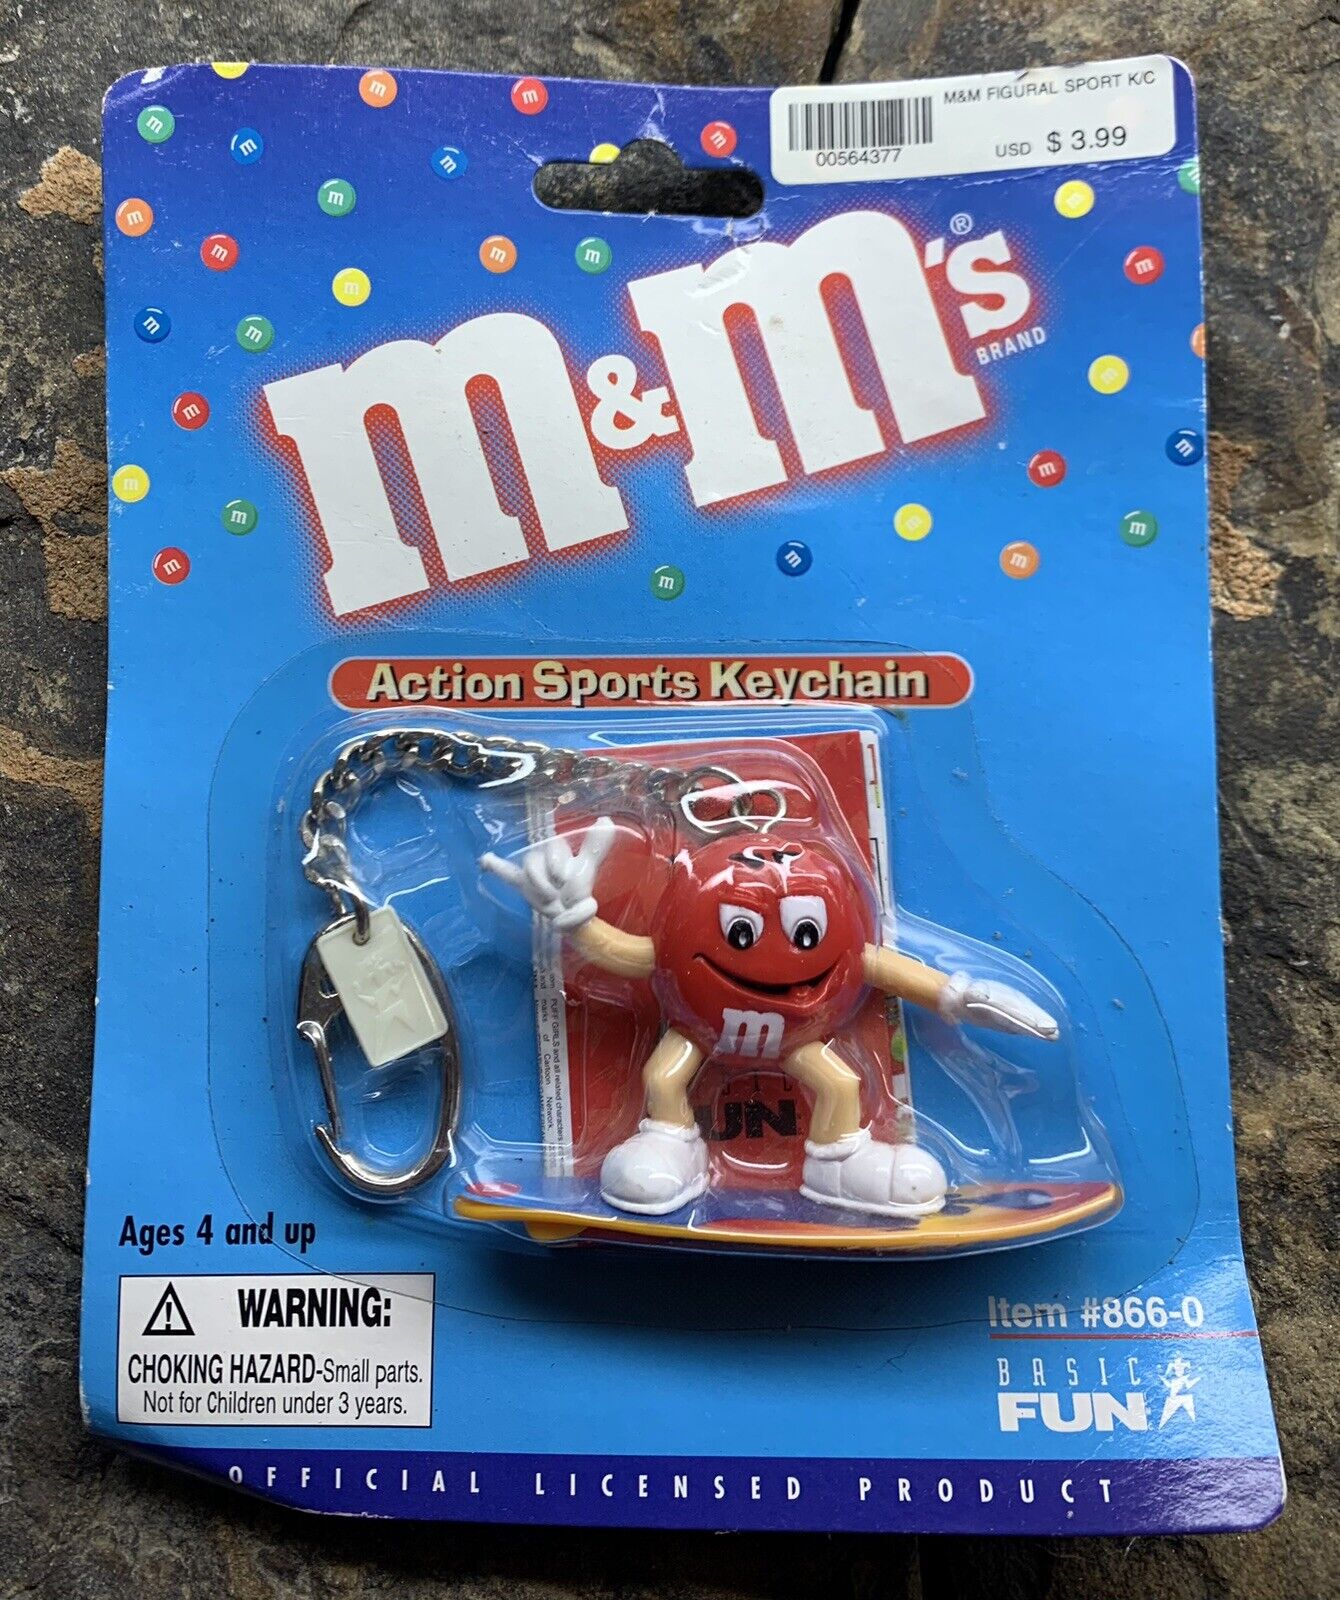 M & M Candy Red Surfing Key Chain. New